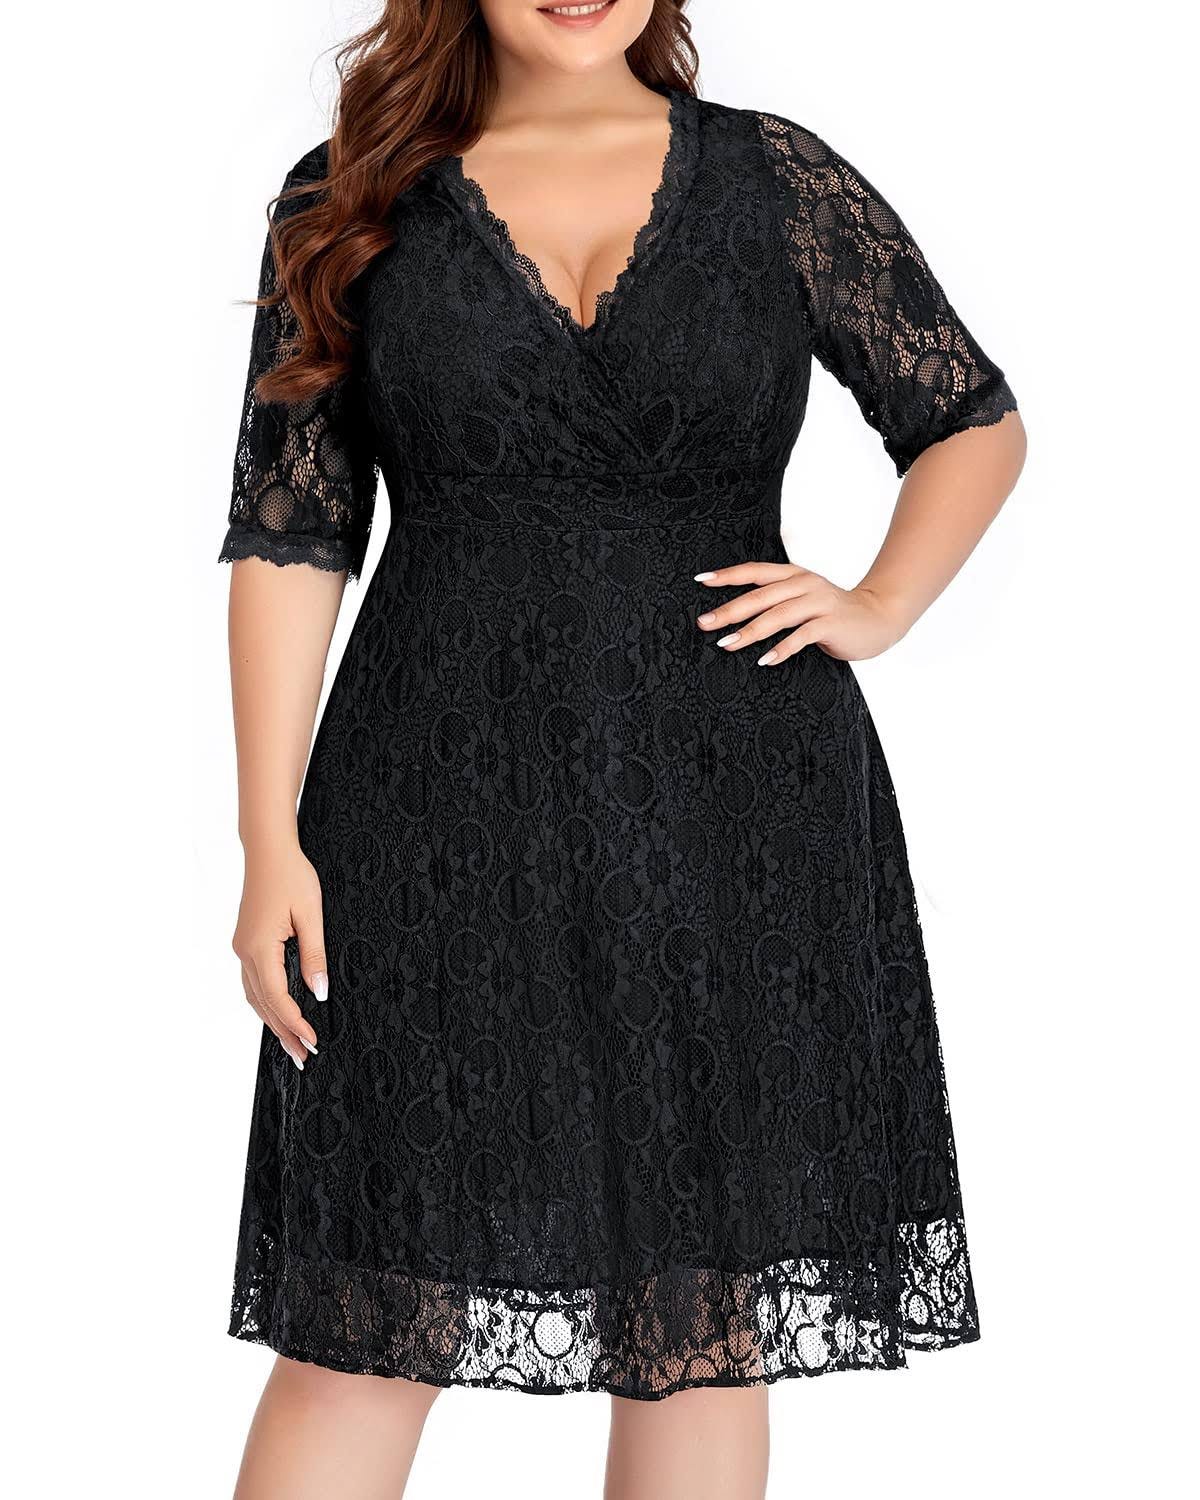 Stylish Midi Dress - Perfect for Plus Size Formal Events | Image